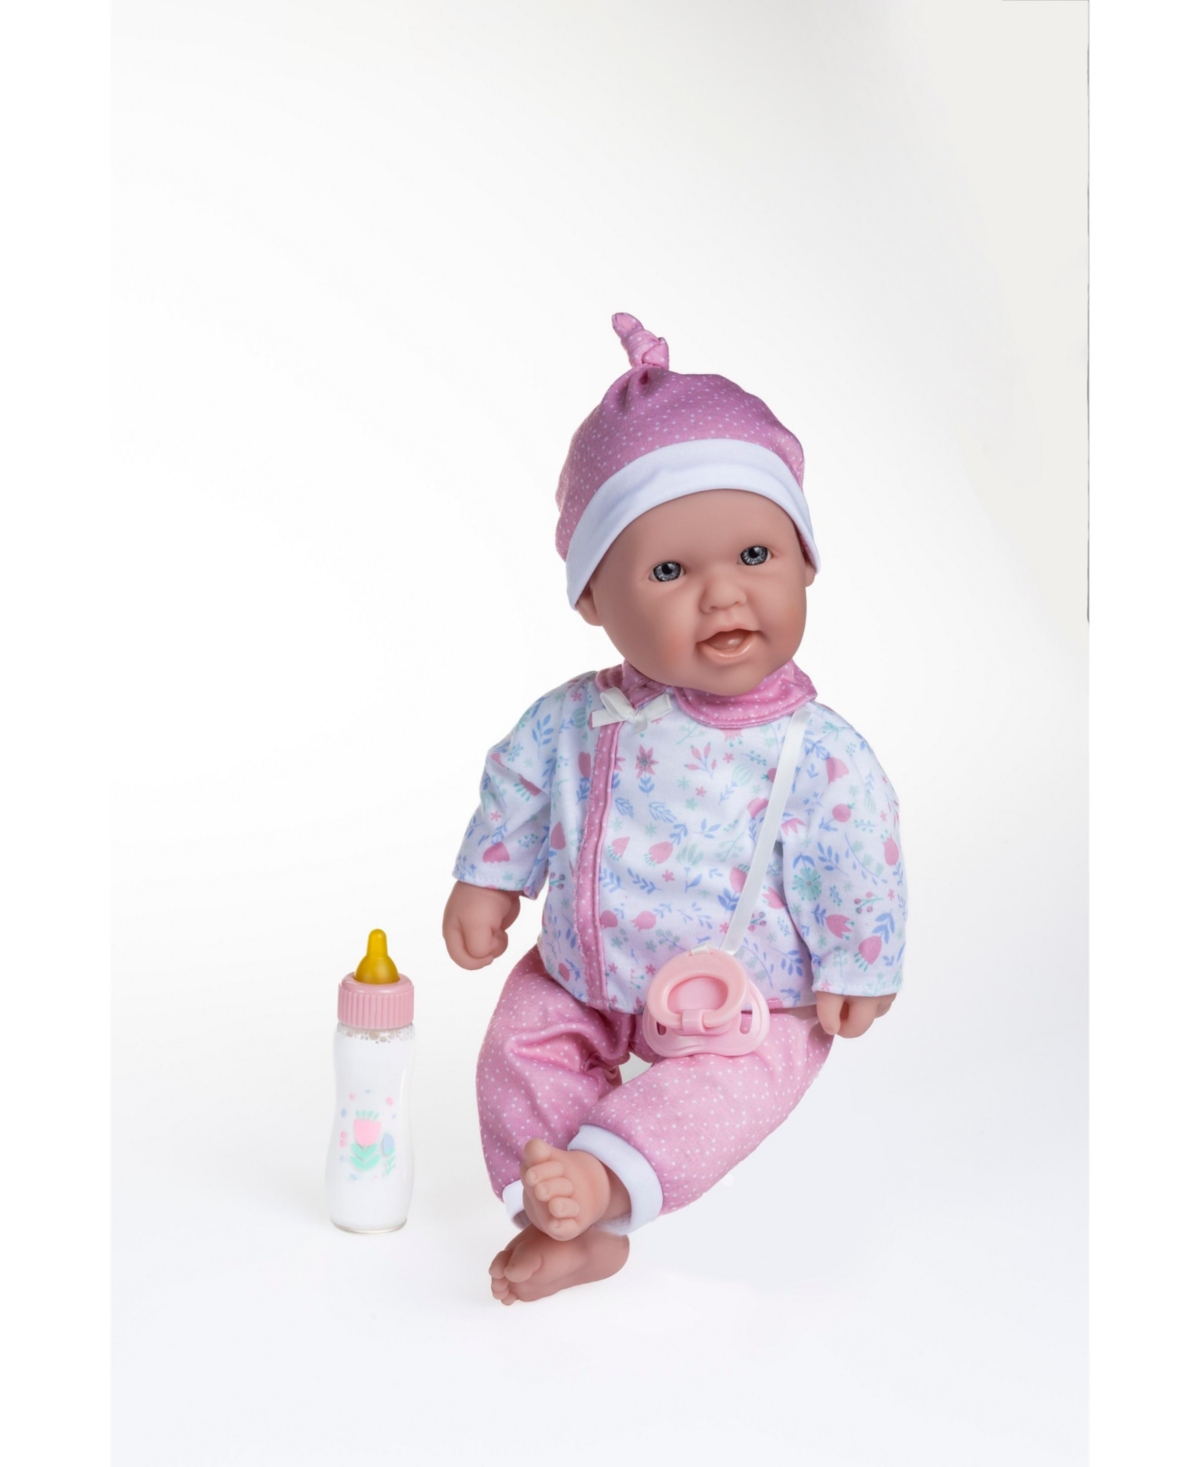 Jc Toys La Baby 14.3" Soft Body Baby Doll 3-piece Outfit With Pacifier, Magic Bottle Set In Multicolor